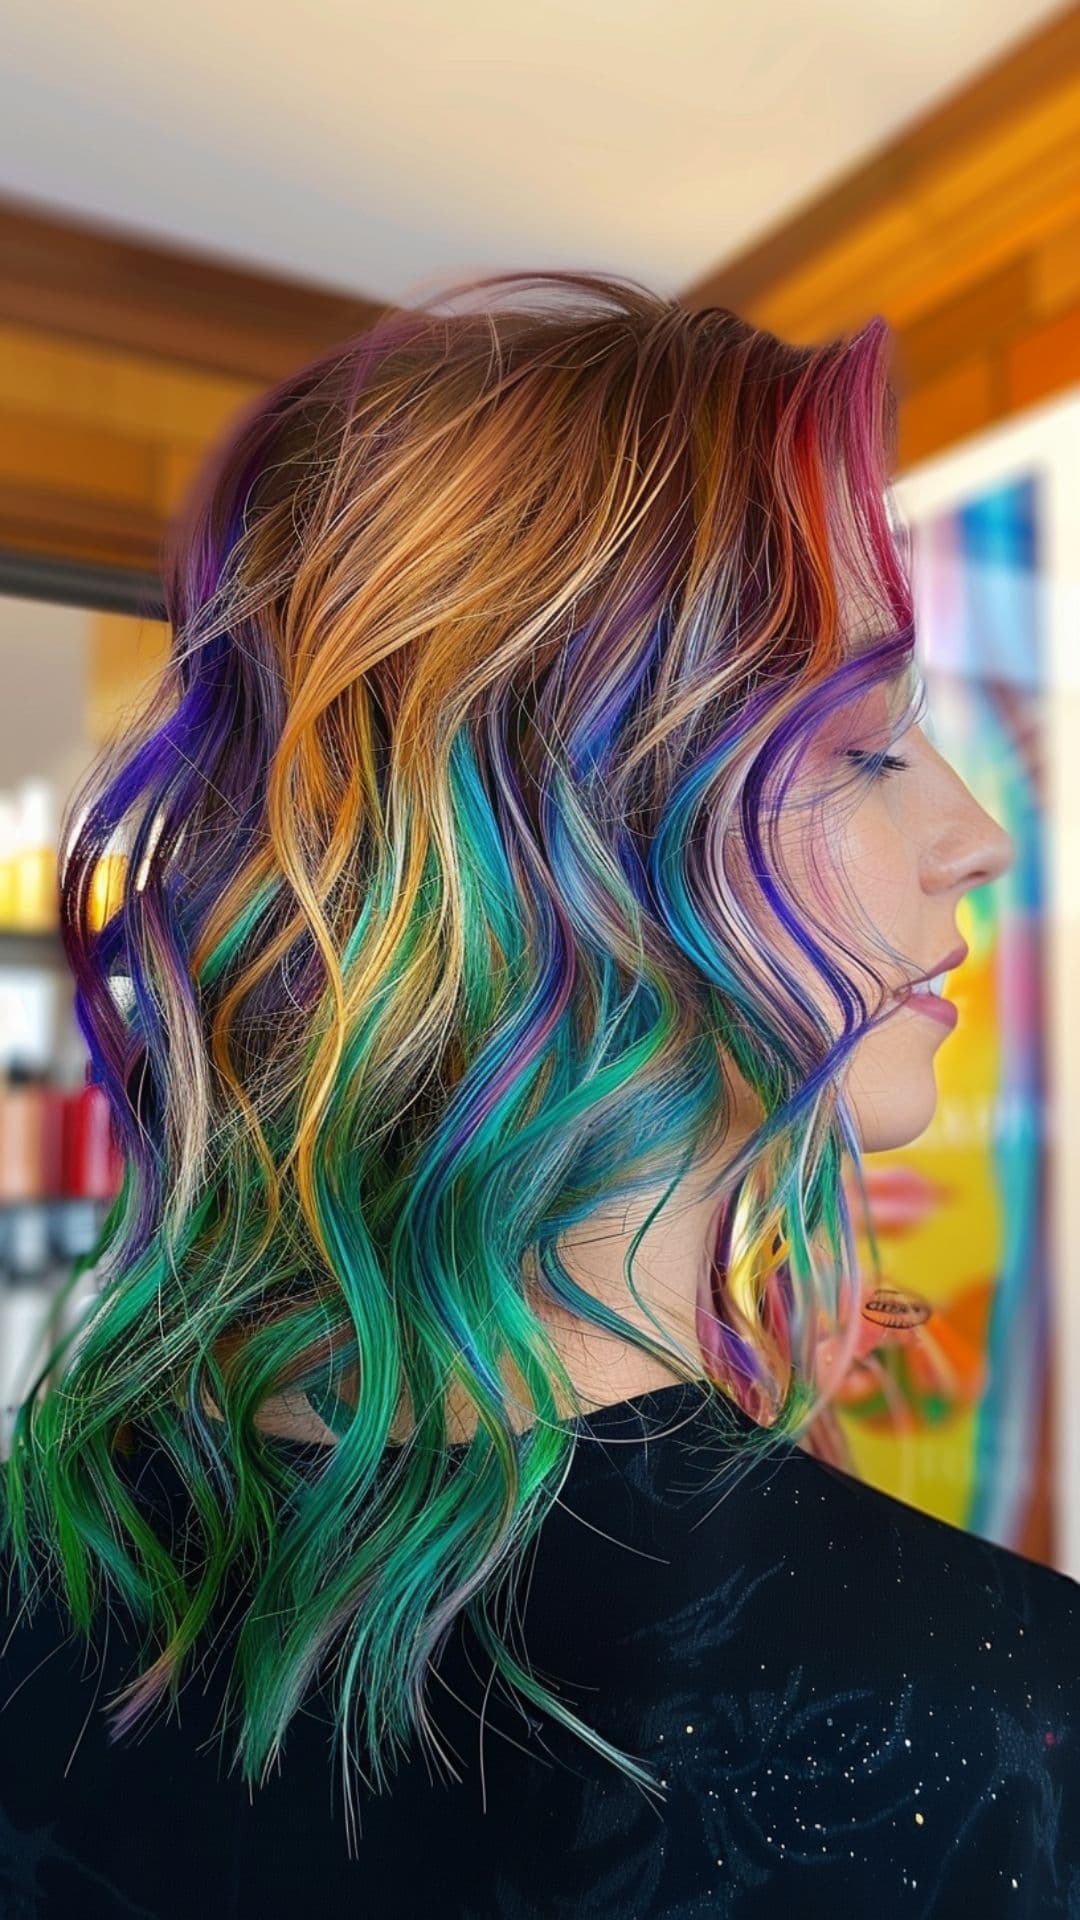 A woman modelling an opal-inspired hair color.